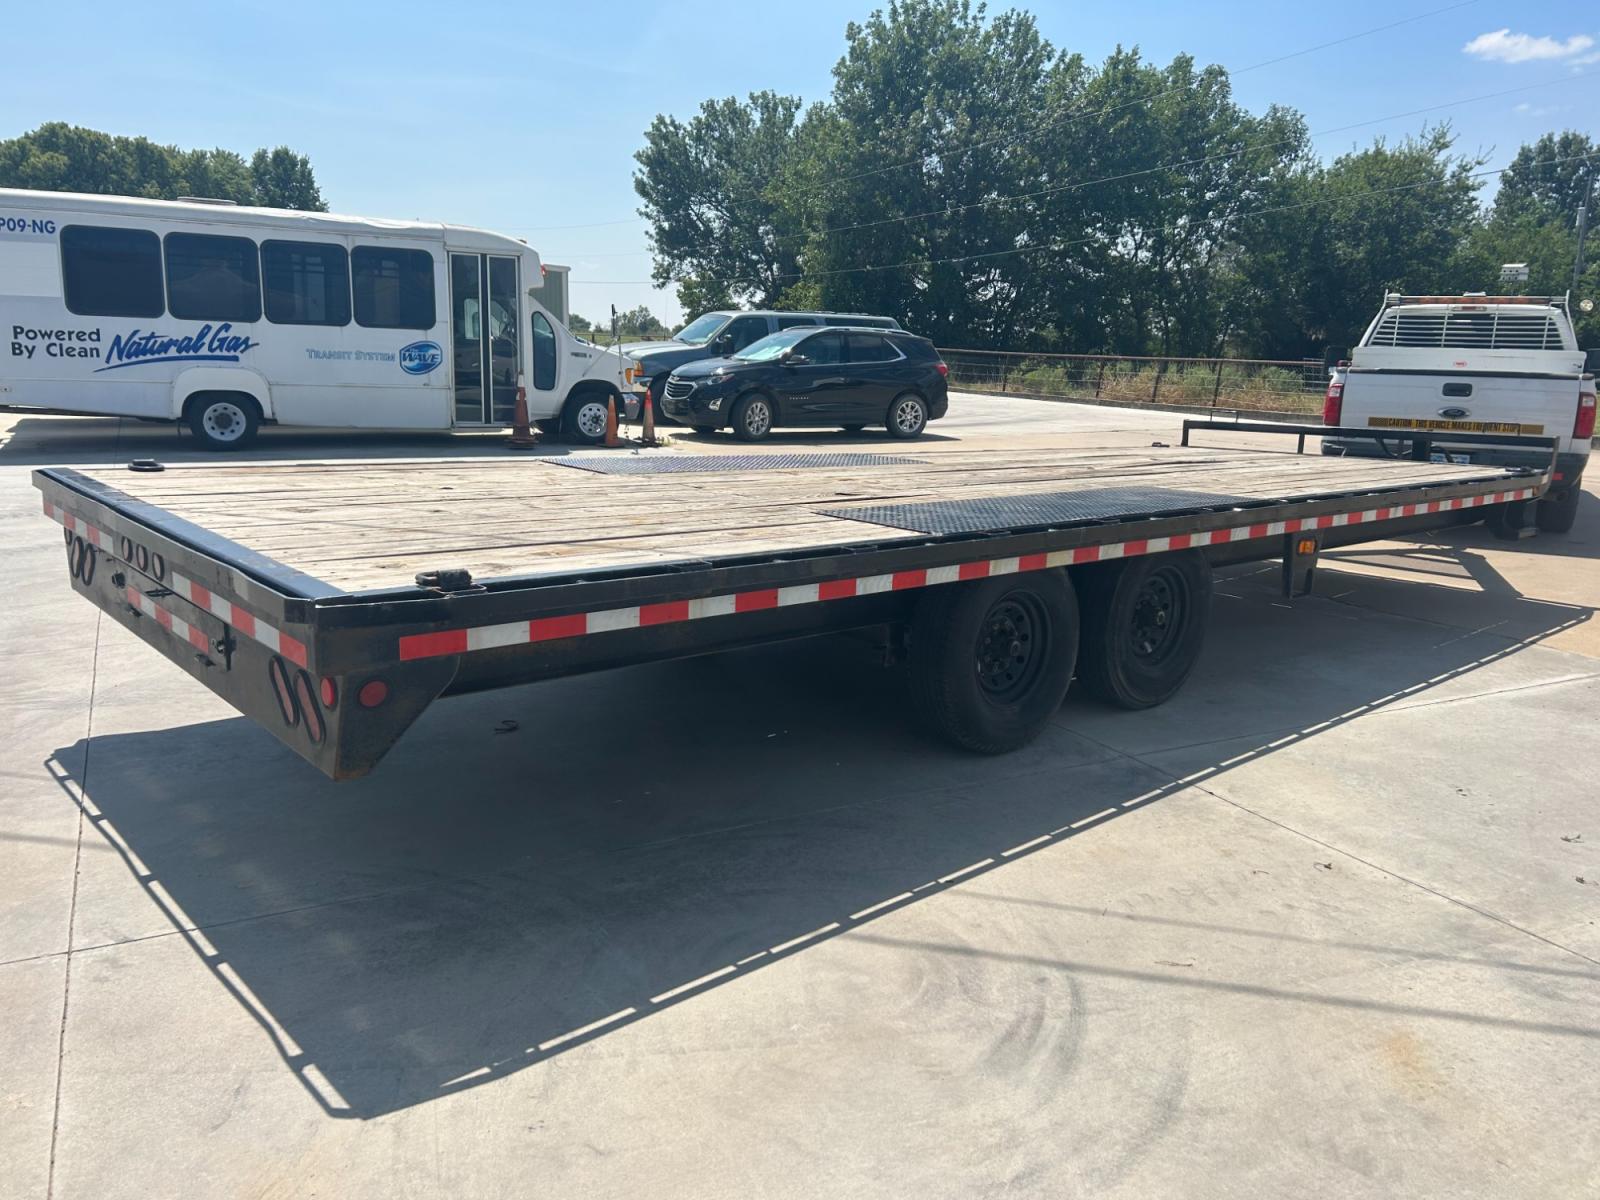 2022 BLACK Norstar Trailers IRONBULL (50HFP2426N1) , located at 17760 Hwy 62, Morris, OK, 74445, 35.609104, -95.877060 - 2022 IRONBULL TRAILER FEATURES 10" I-BEAM FRAME AND TONGUE, 2 5/16'' ADJUSTABLE COUPLER, 3'' STRUCTURAL CROSSMEMBERS, DECK HEIGHT 33'', RUB RAIL, STAKE POCKETS, PIPE SPOOLS, CAMBERED SPRING AXLES, MULTI-LEAF SLIPPER SPRING SUSPENSION, E-Z LUBE HUBS, 2 ELECTRIC BREAK AXLES, FULL 93' WIDE DECKOVER, 8 - Photo #2